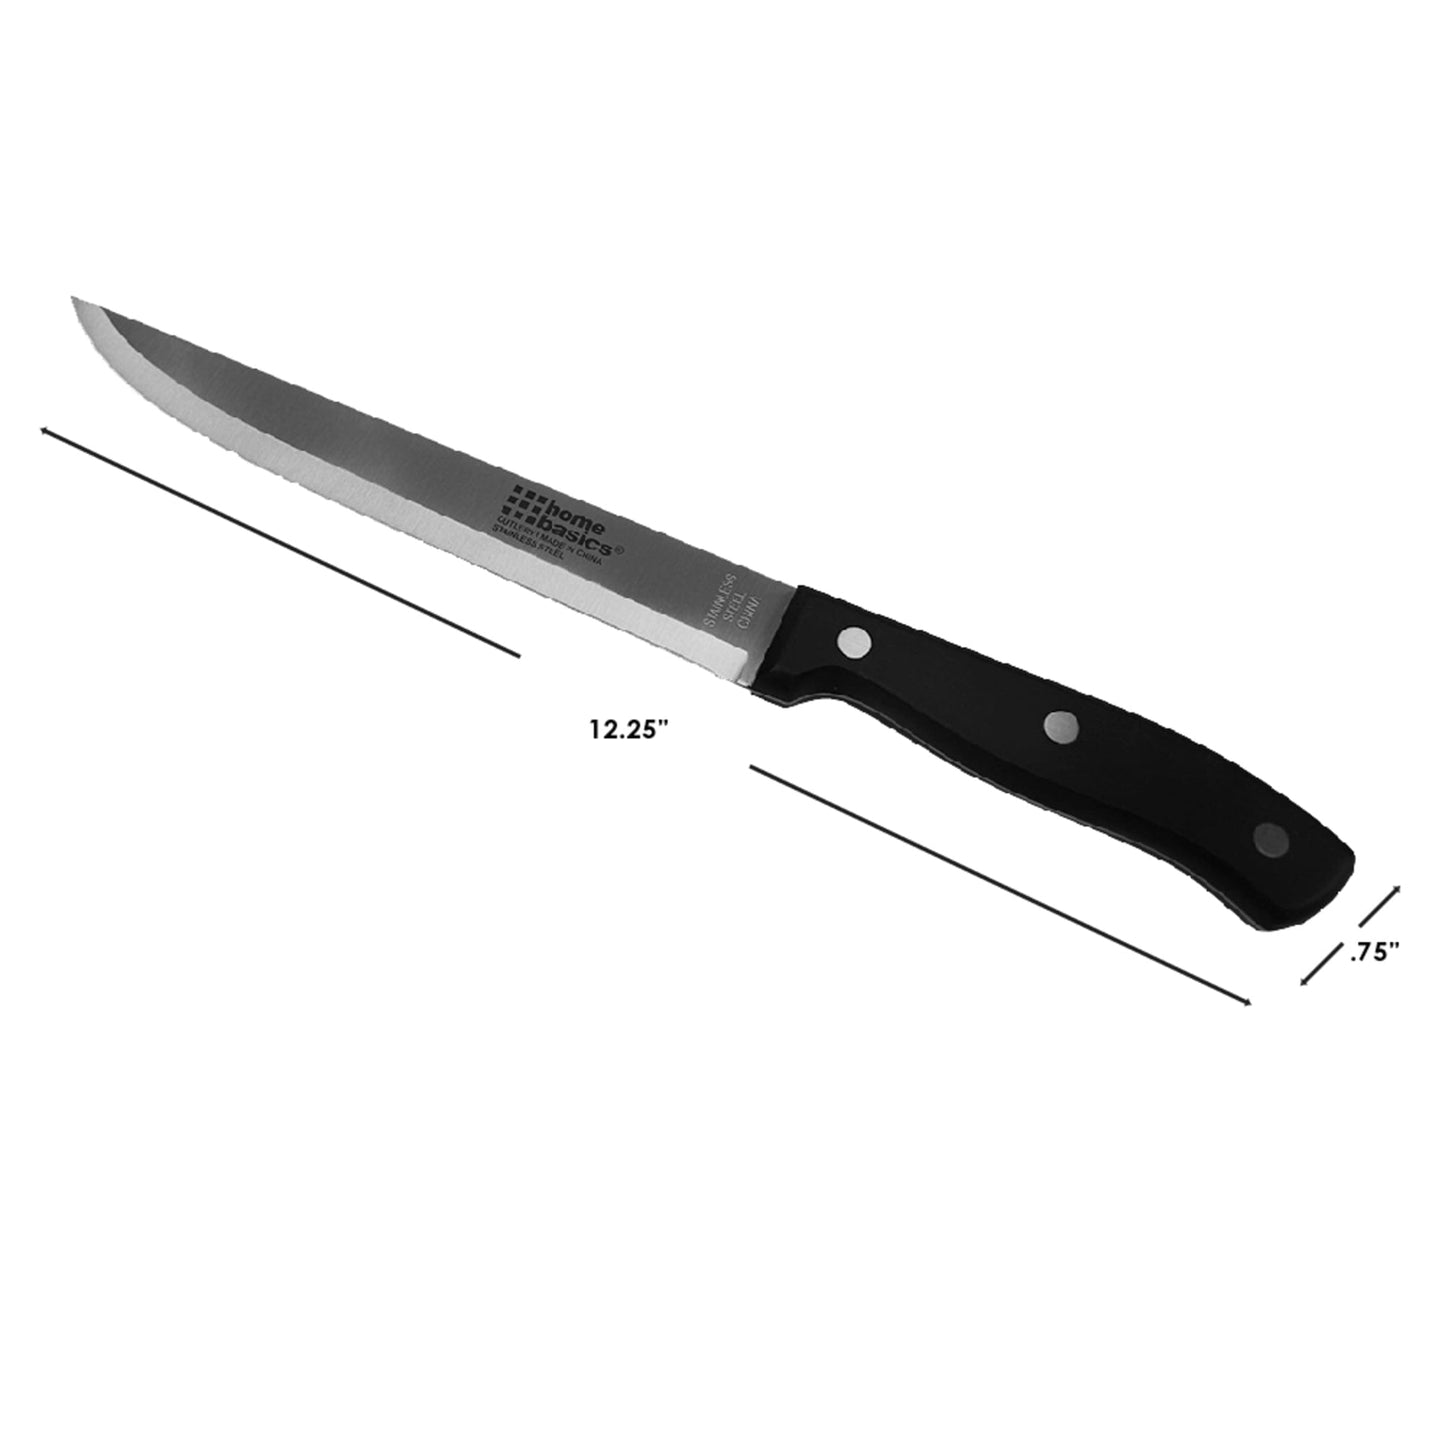 8" Stainless Steel Carving Knife with Contoured Bakelite Handle, Black